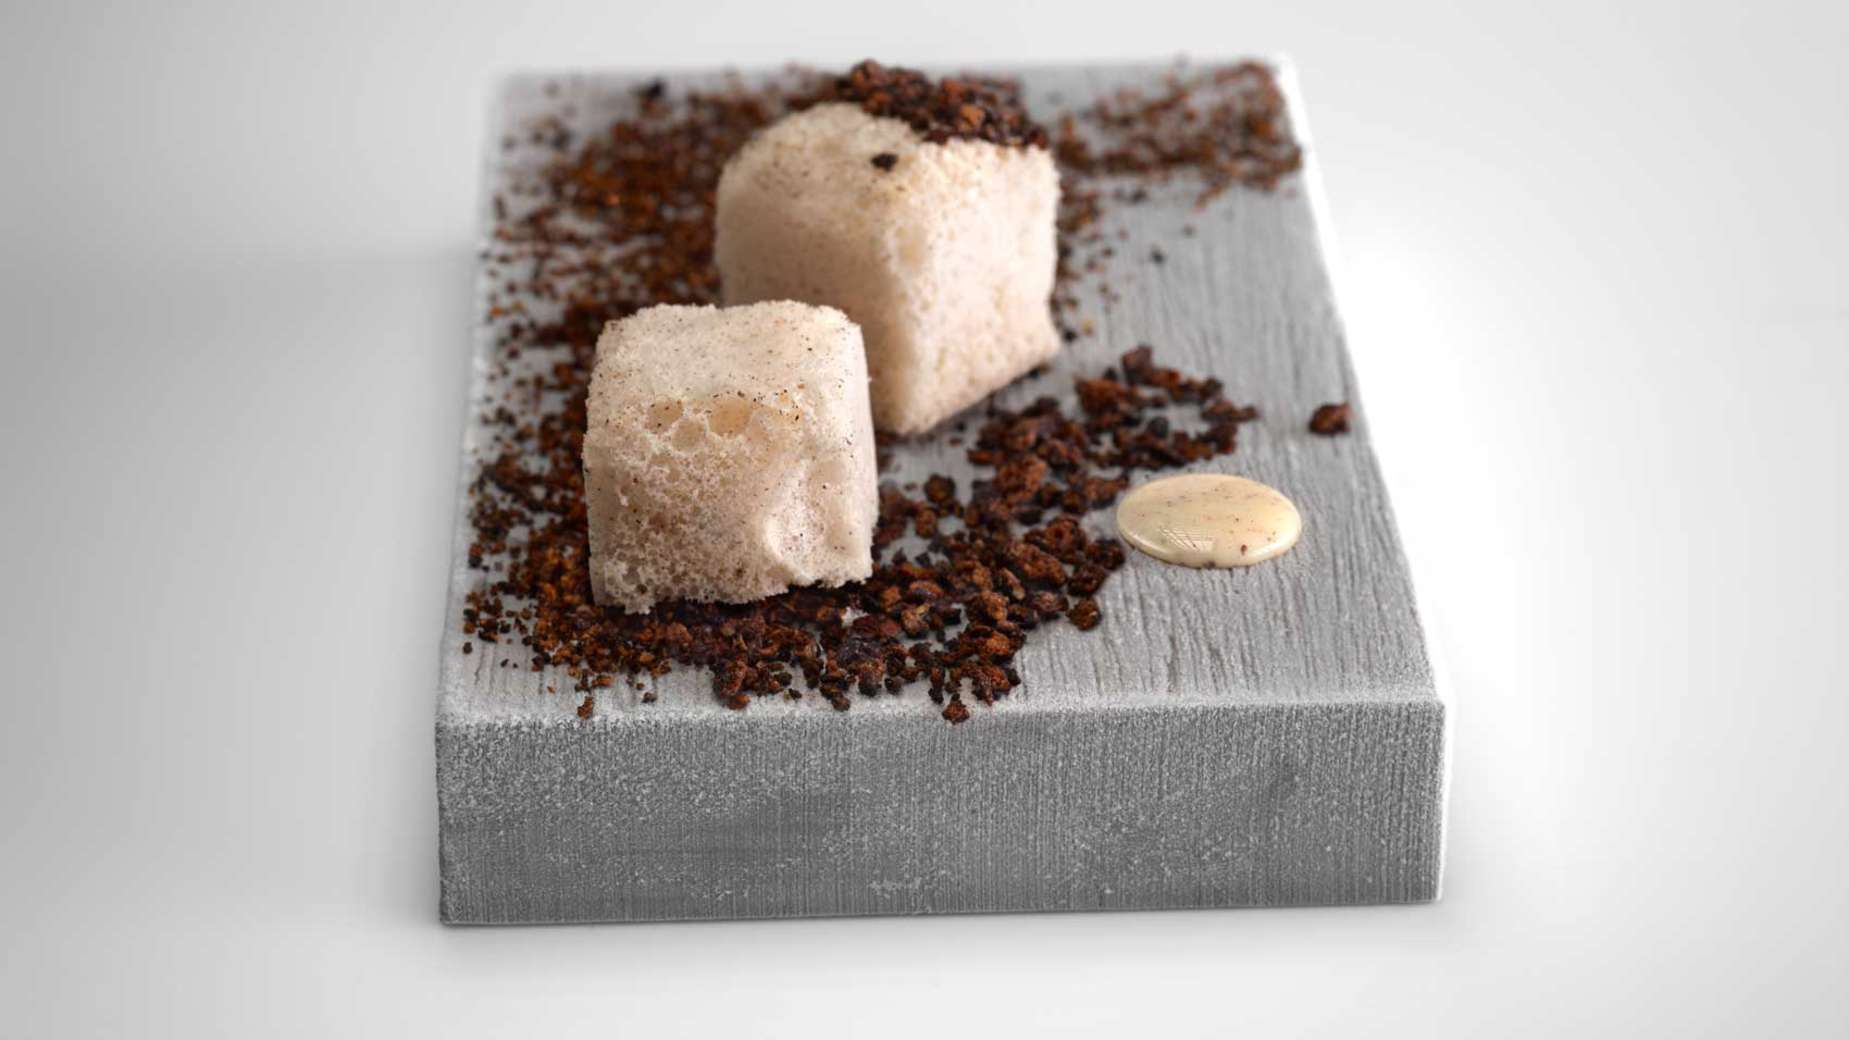 Frozen lump of spices and quinoa. Spiced muffin burnt with horseradish leaves.
PHOTO: José Luis López de Zubiría. 